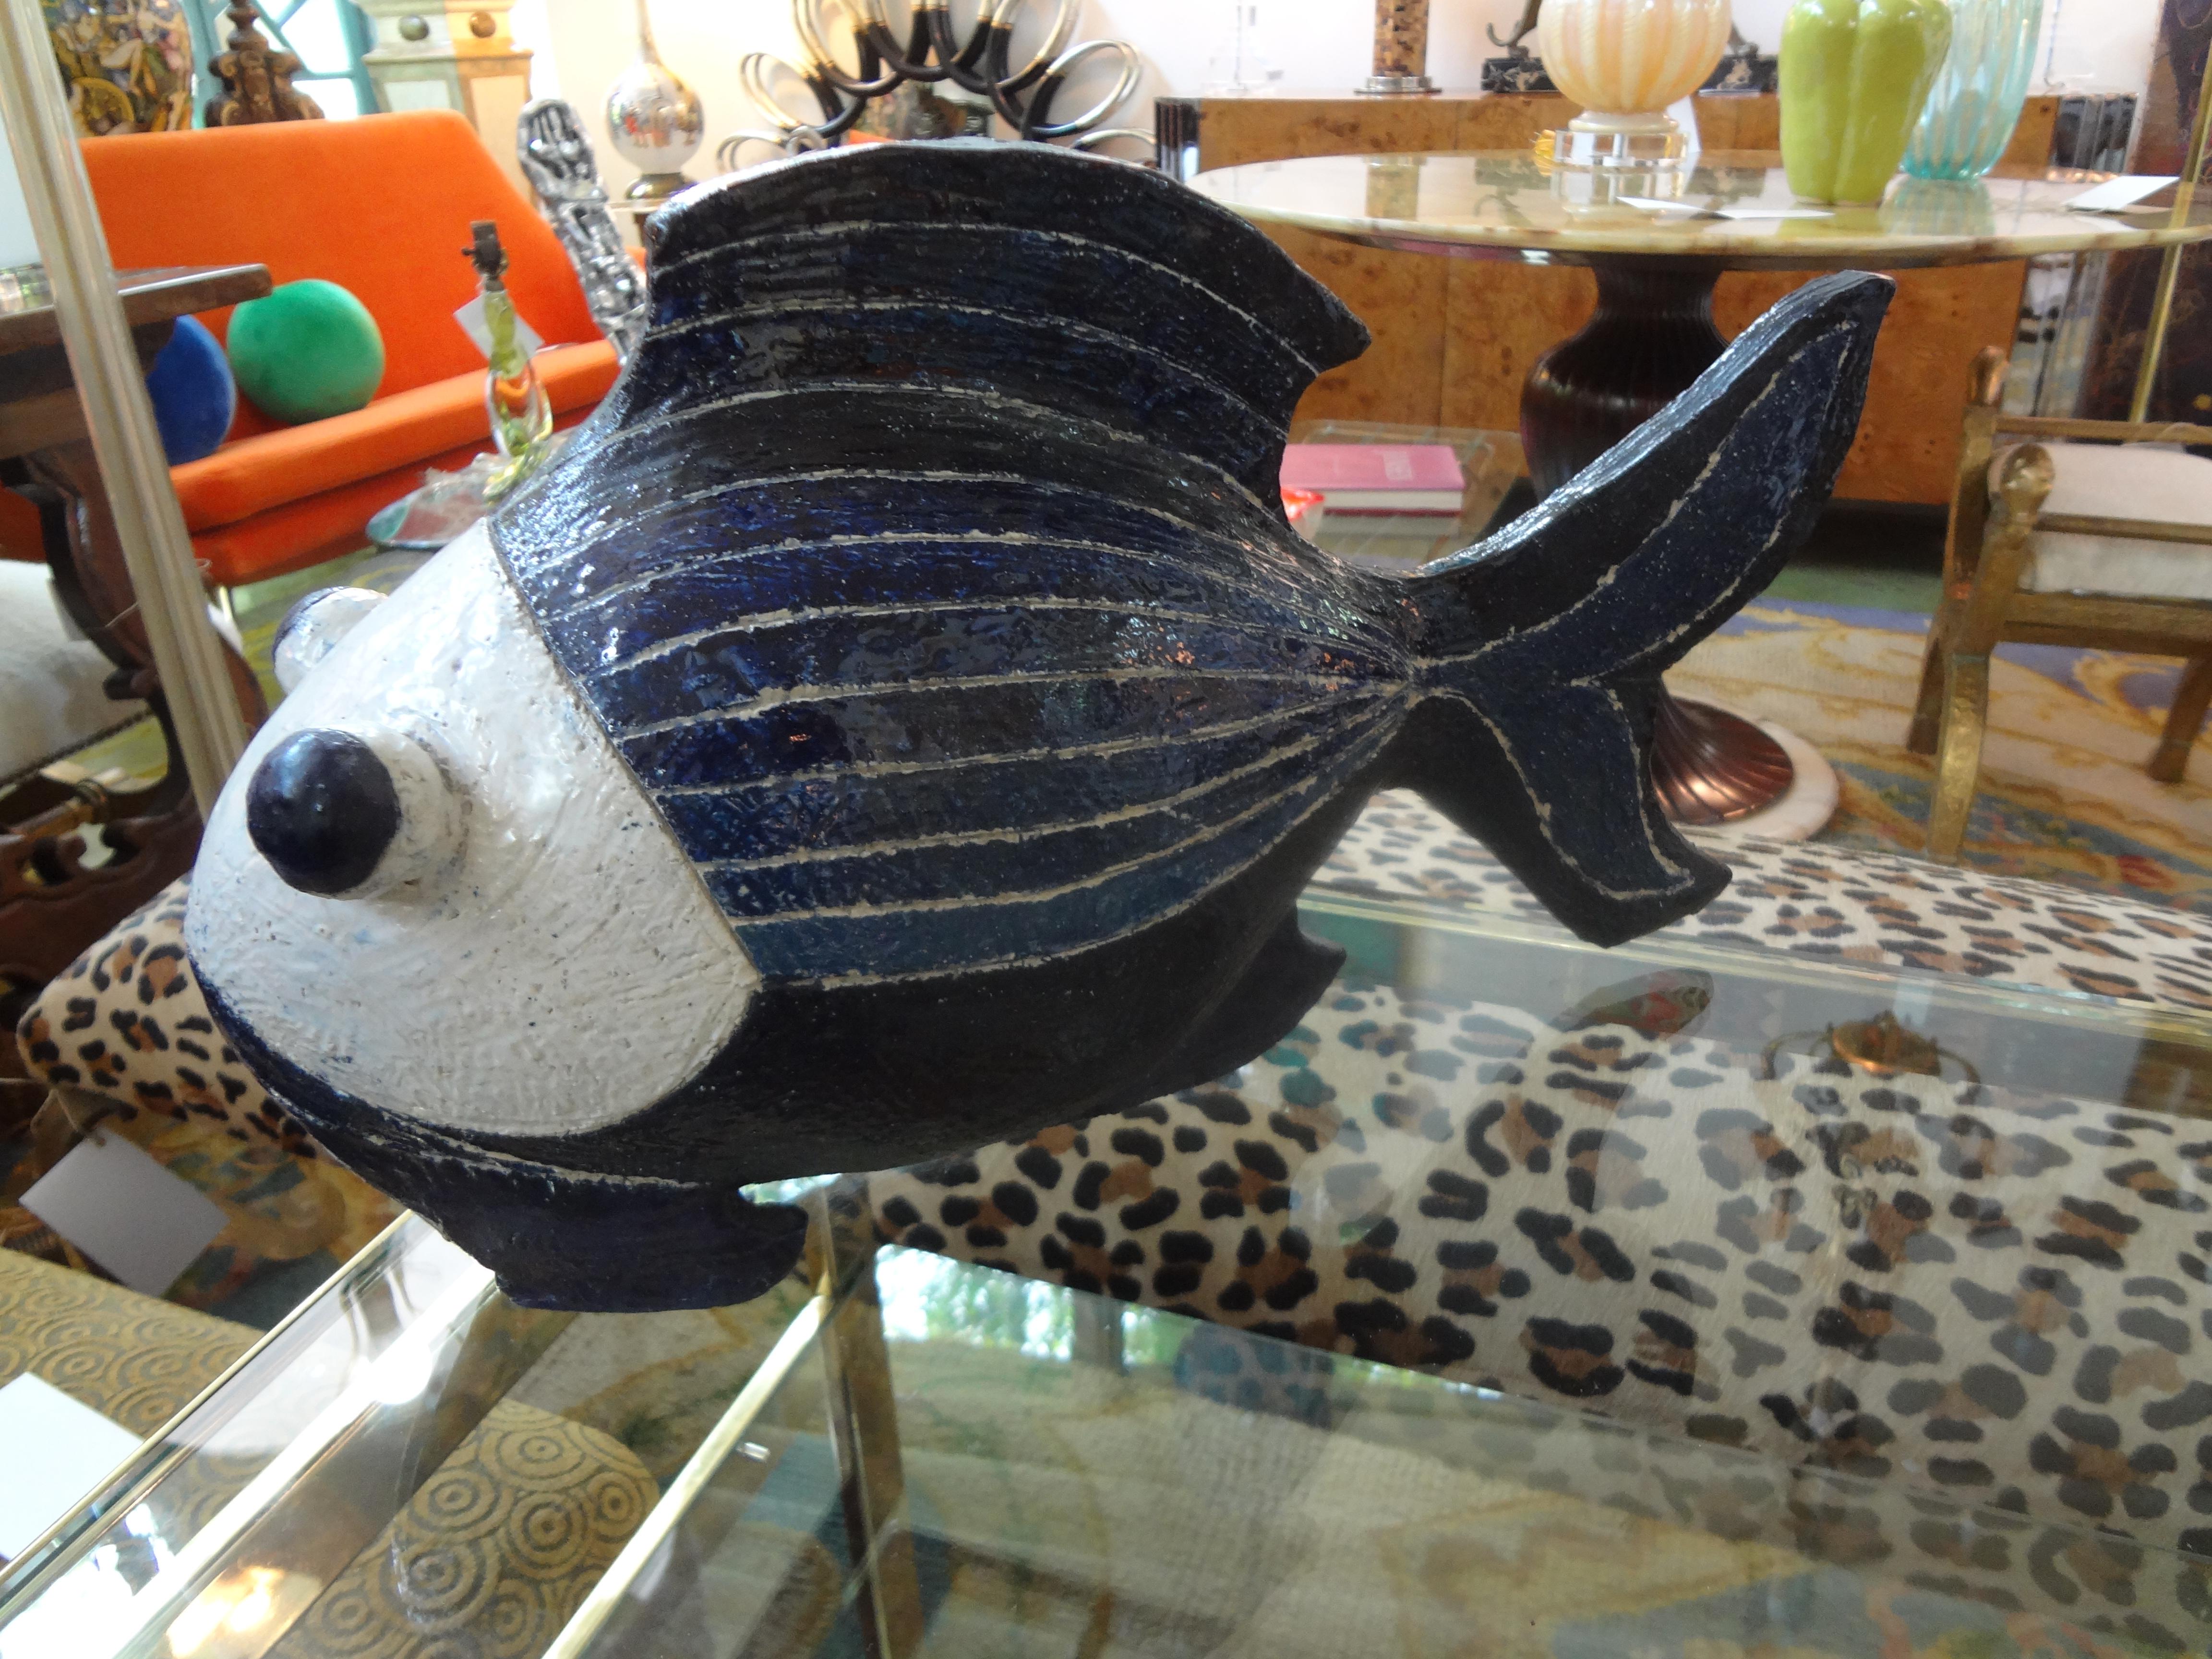 Midcentury studio art pottery fish sculpture.
Beautifully executed vintage studio art pottery fish sculpture. This large Hollywood Regency fish sculpture is executed in two beautiful shades of blue and white.